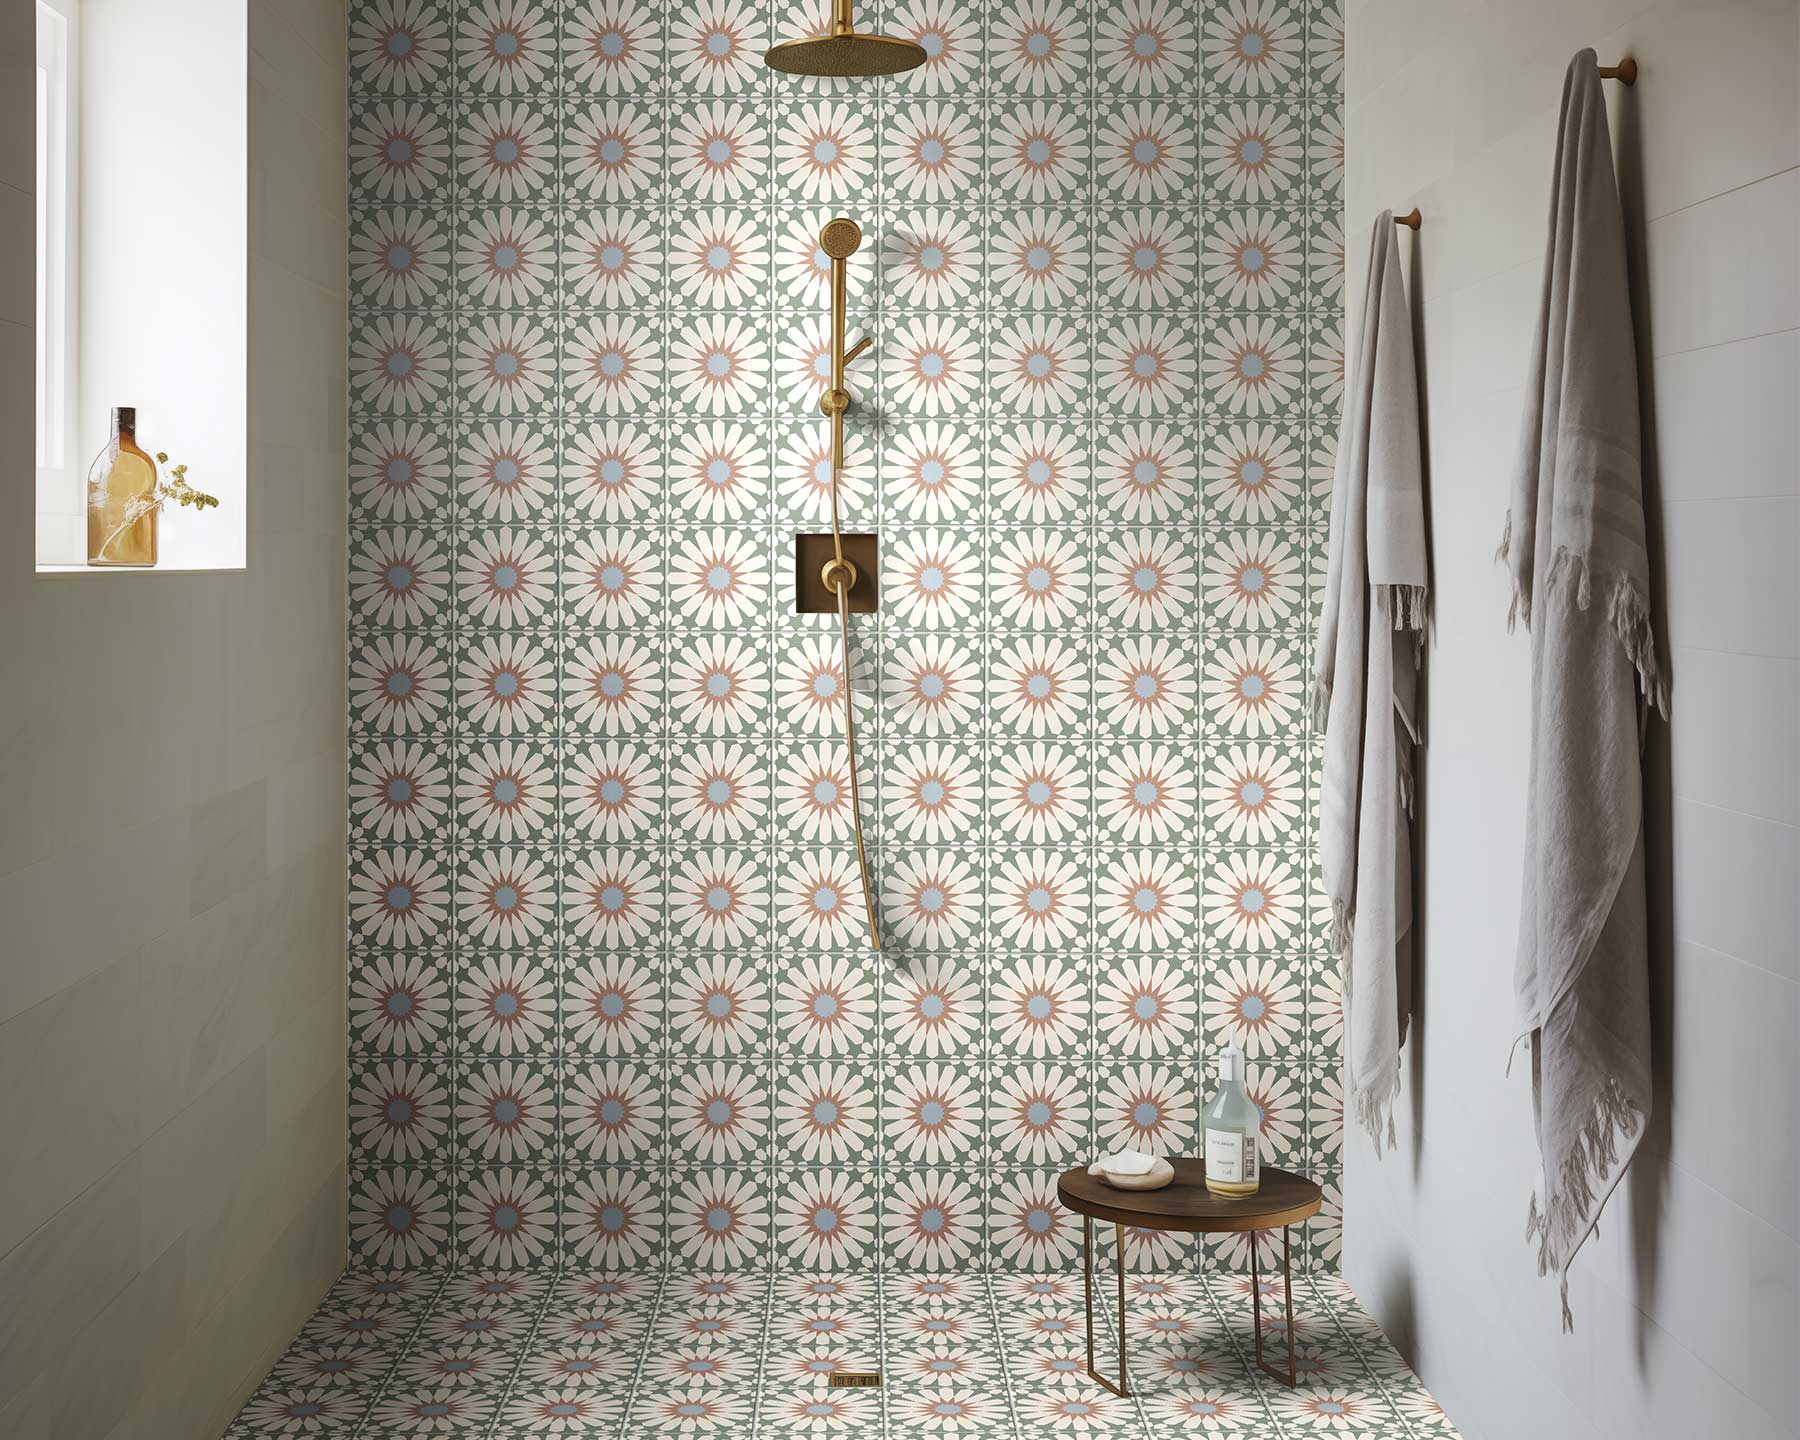 Bring a fresh approach to your tiling with a floral design